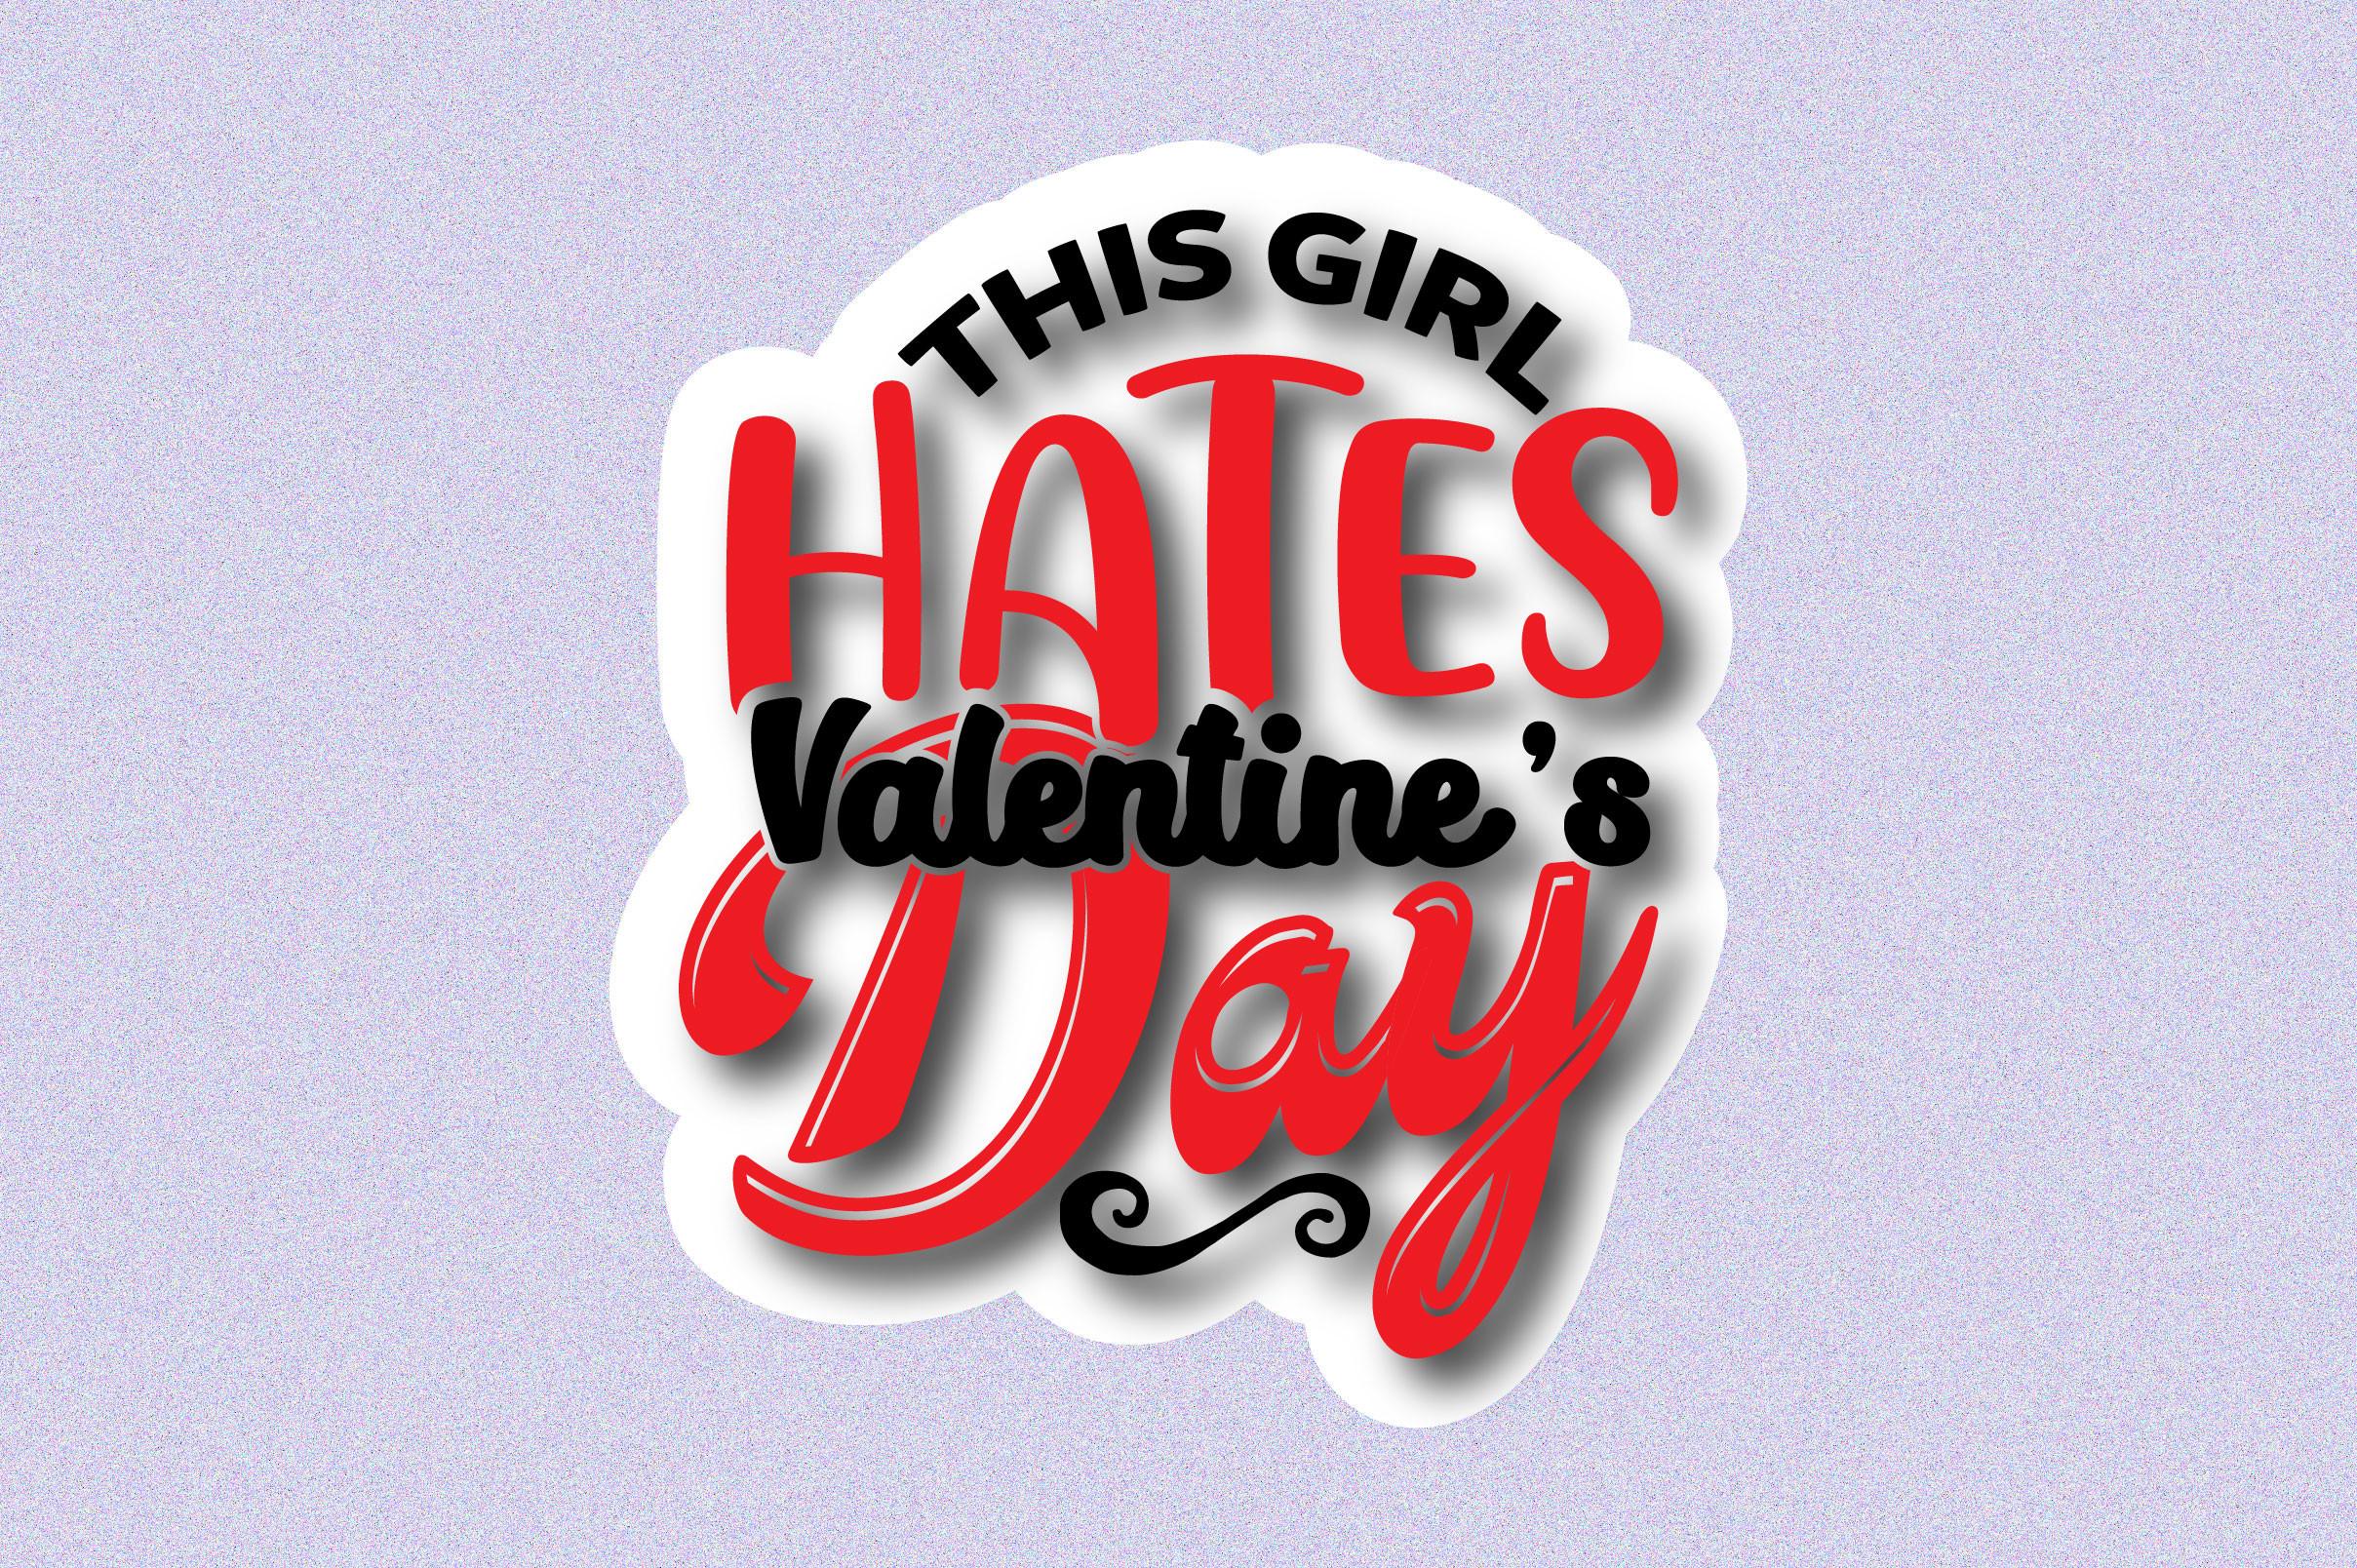 This Girl Hates Valentine’s Day